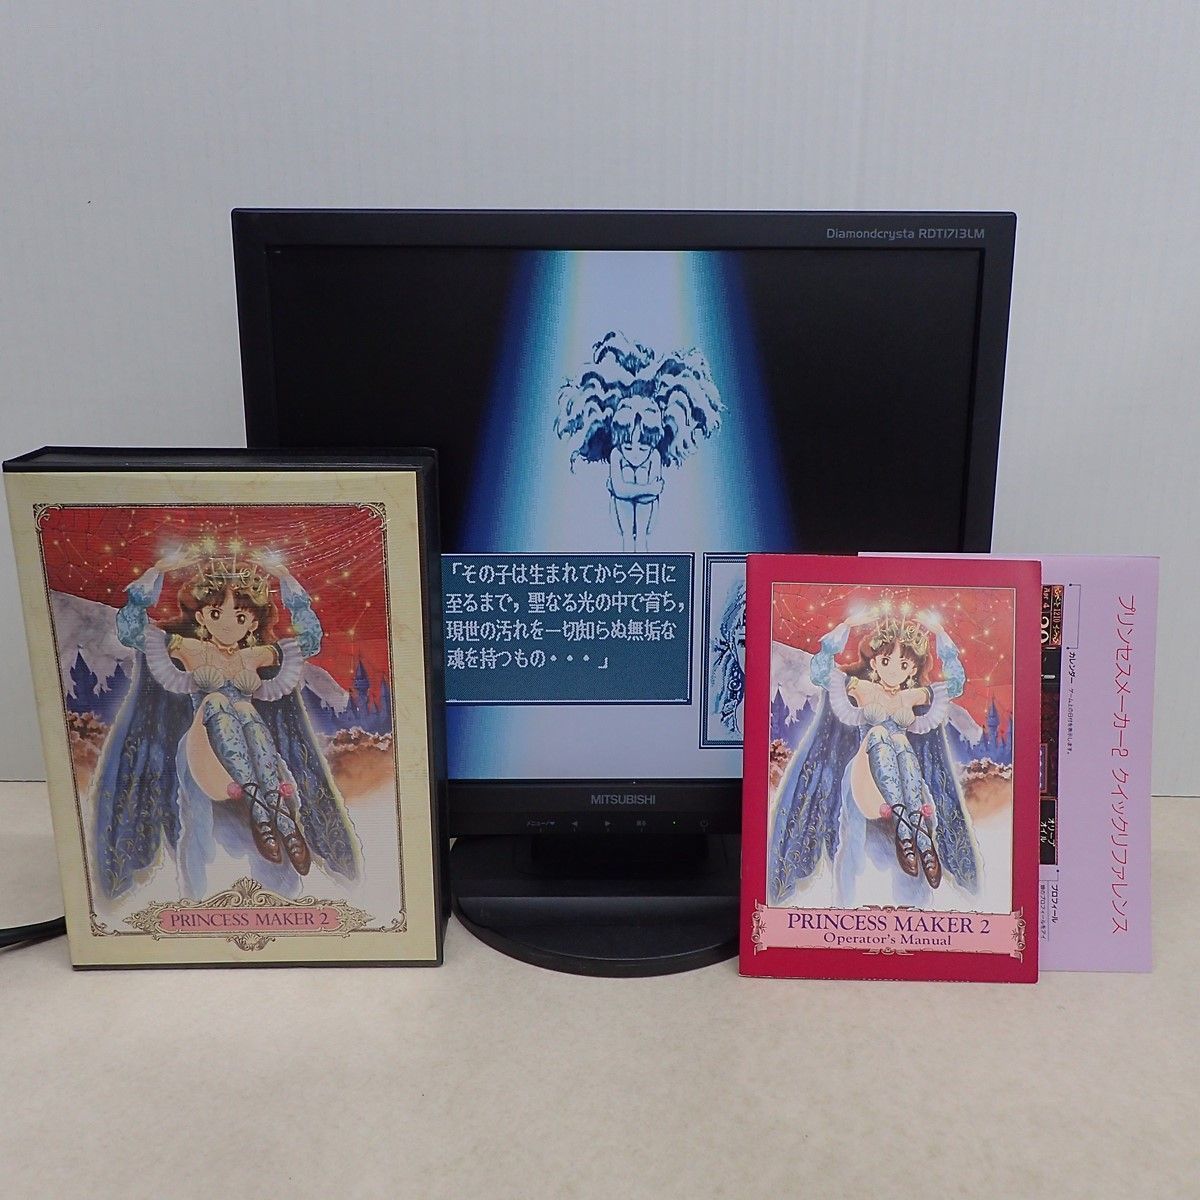 PC-9801 PC98 Princess Maker 2 Game FDDs w/Manual and Box set, Working-f0903-